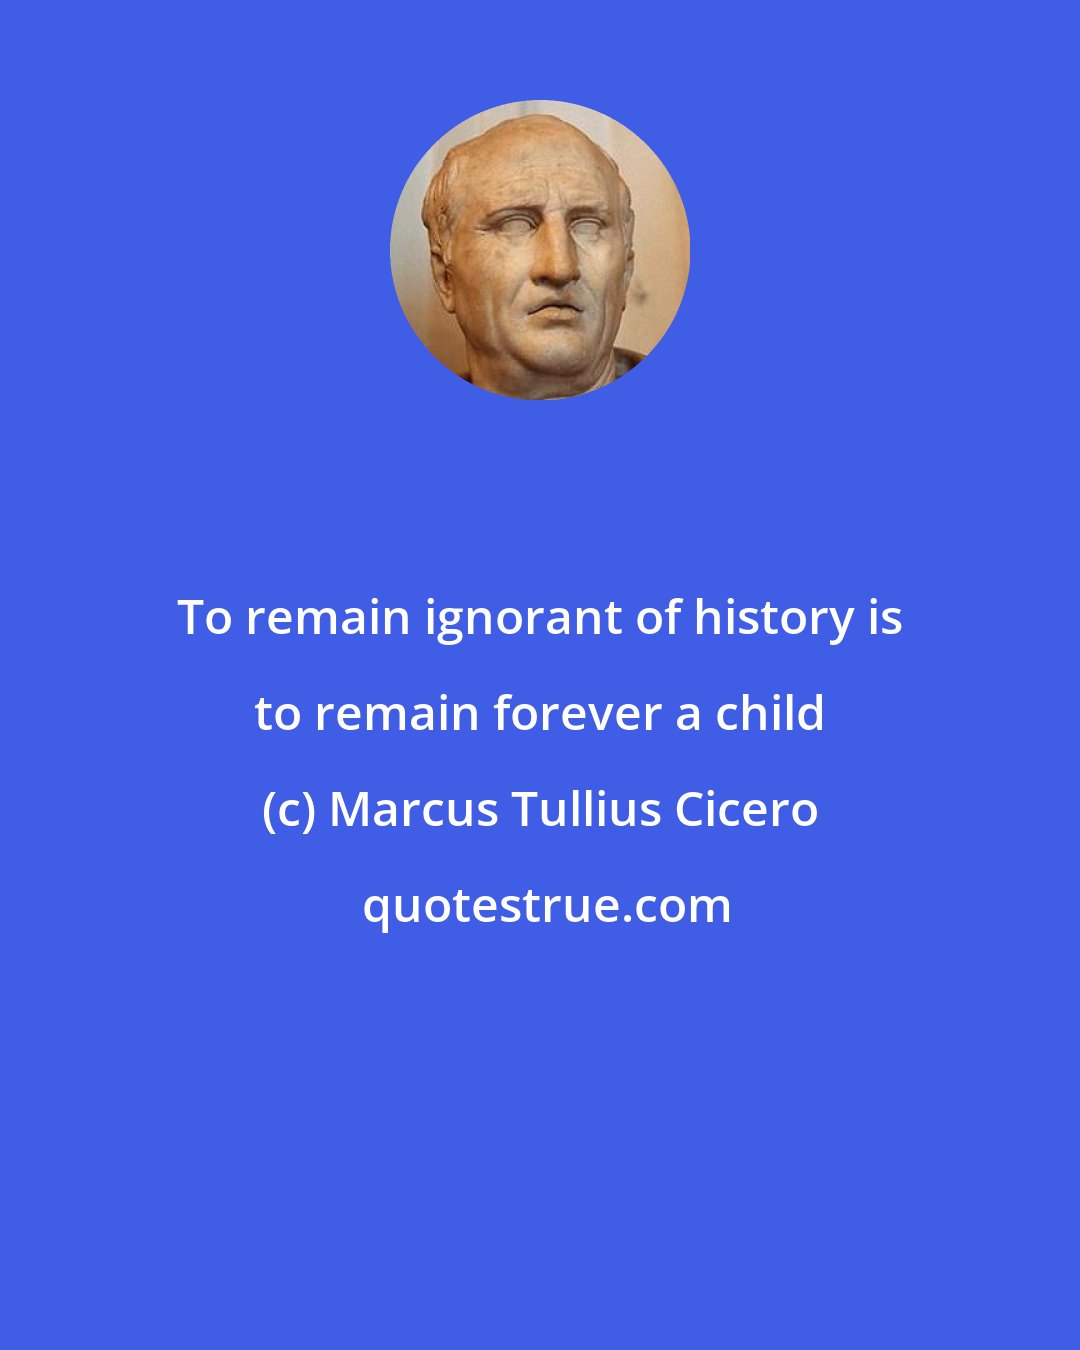 Marcus Tullius Cicero: To remain ignorant of history is to remain forever a child